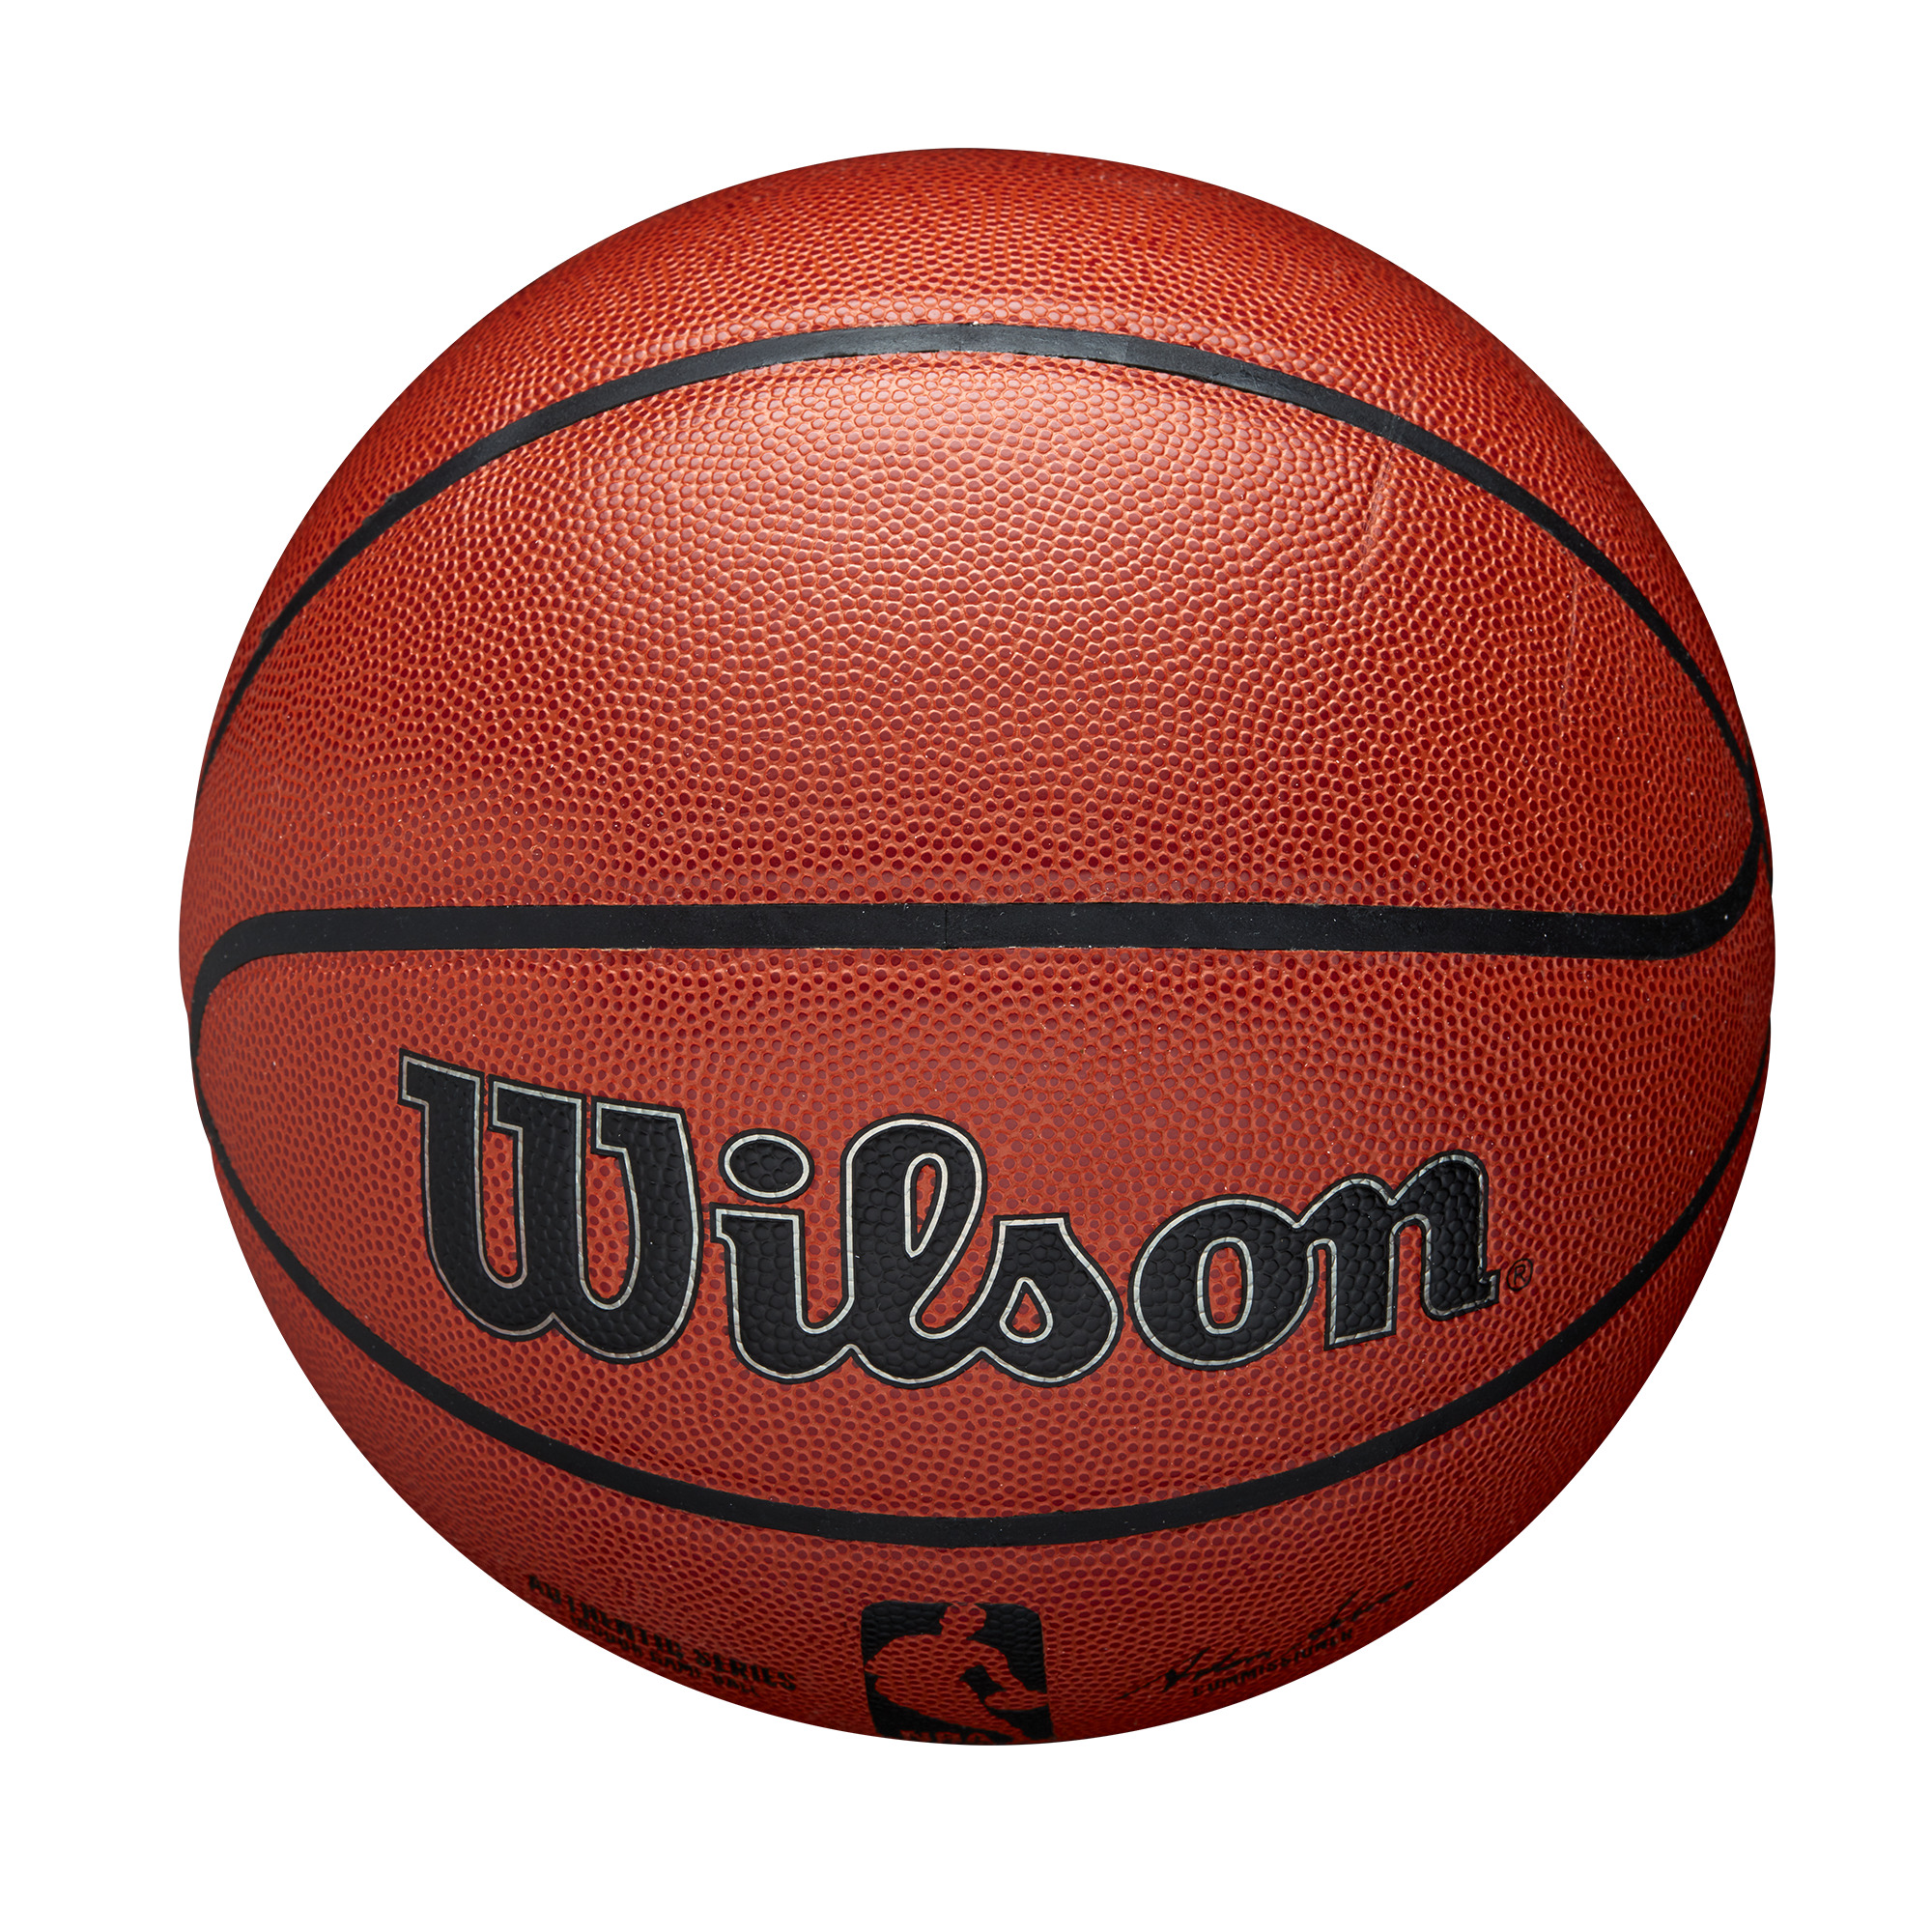 Wilson NBA Authentic Indoor Competition Basketball, Brown, 29.5 in. - image 4 of 6